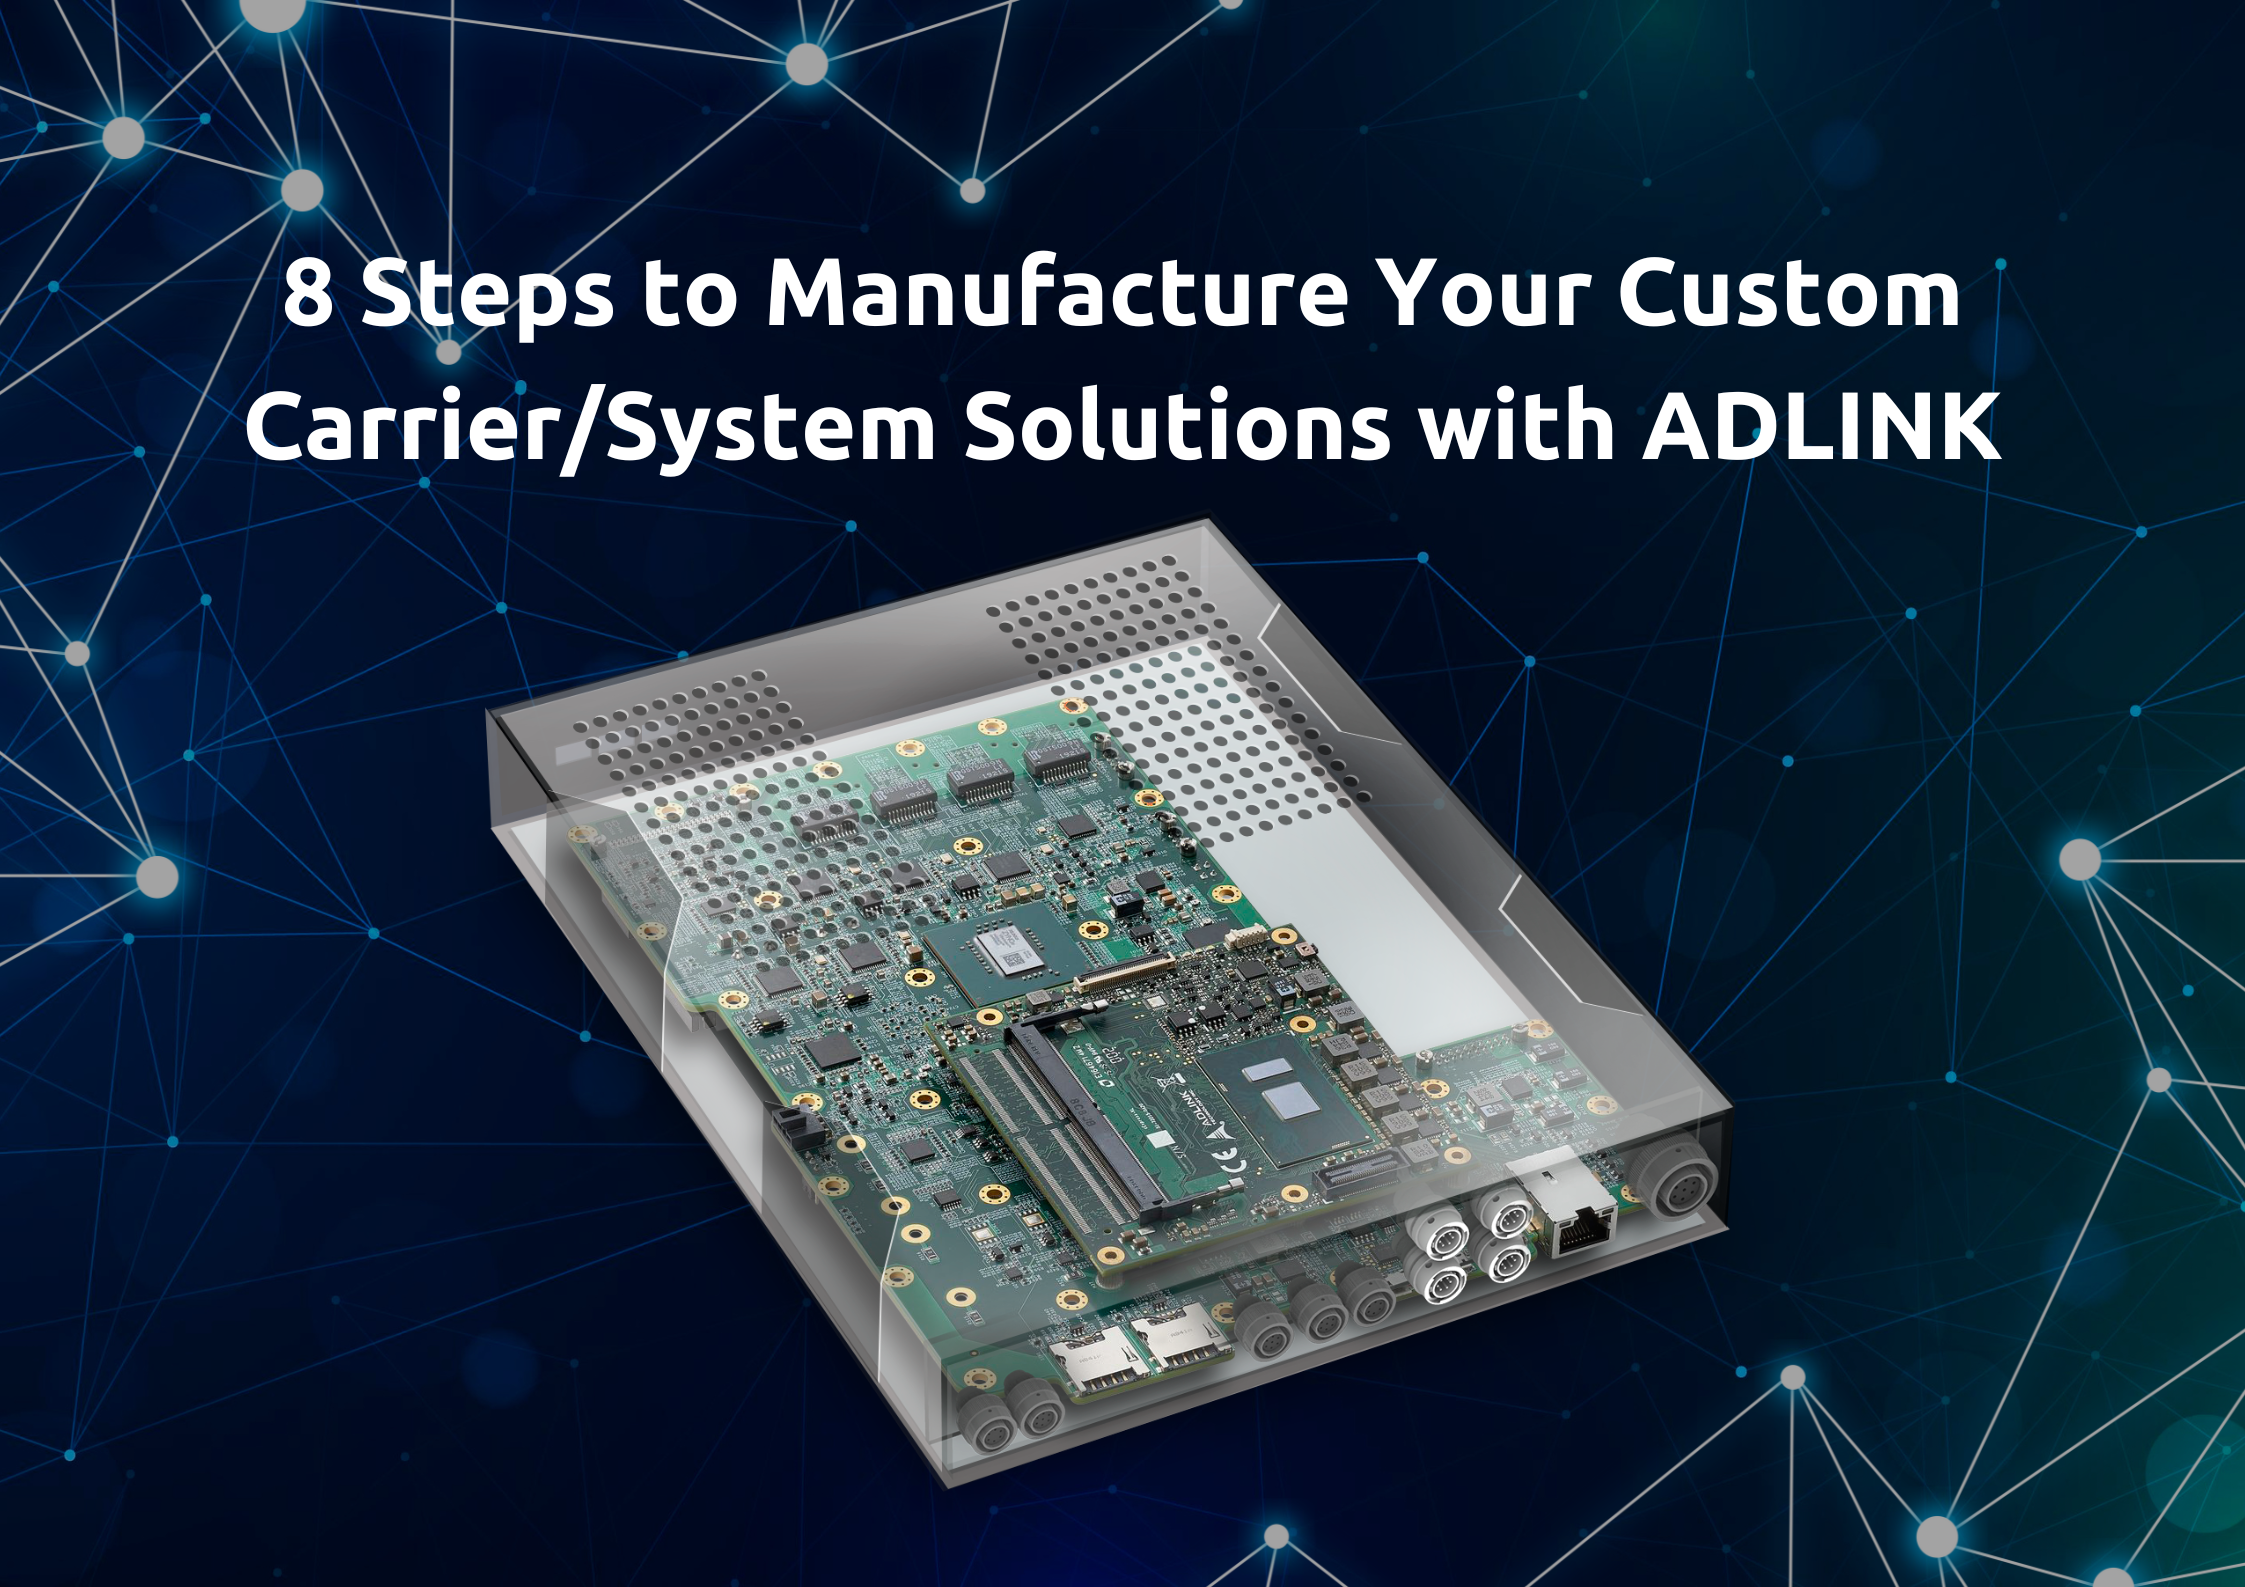 8 Steps to Manufacture Your Custom Carrier/System Solutions with ADLINK